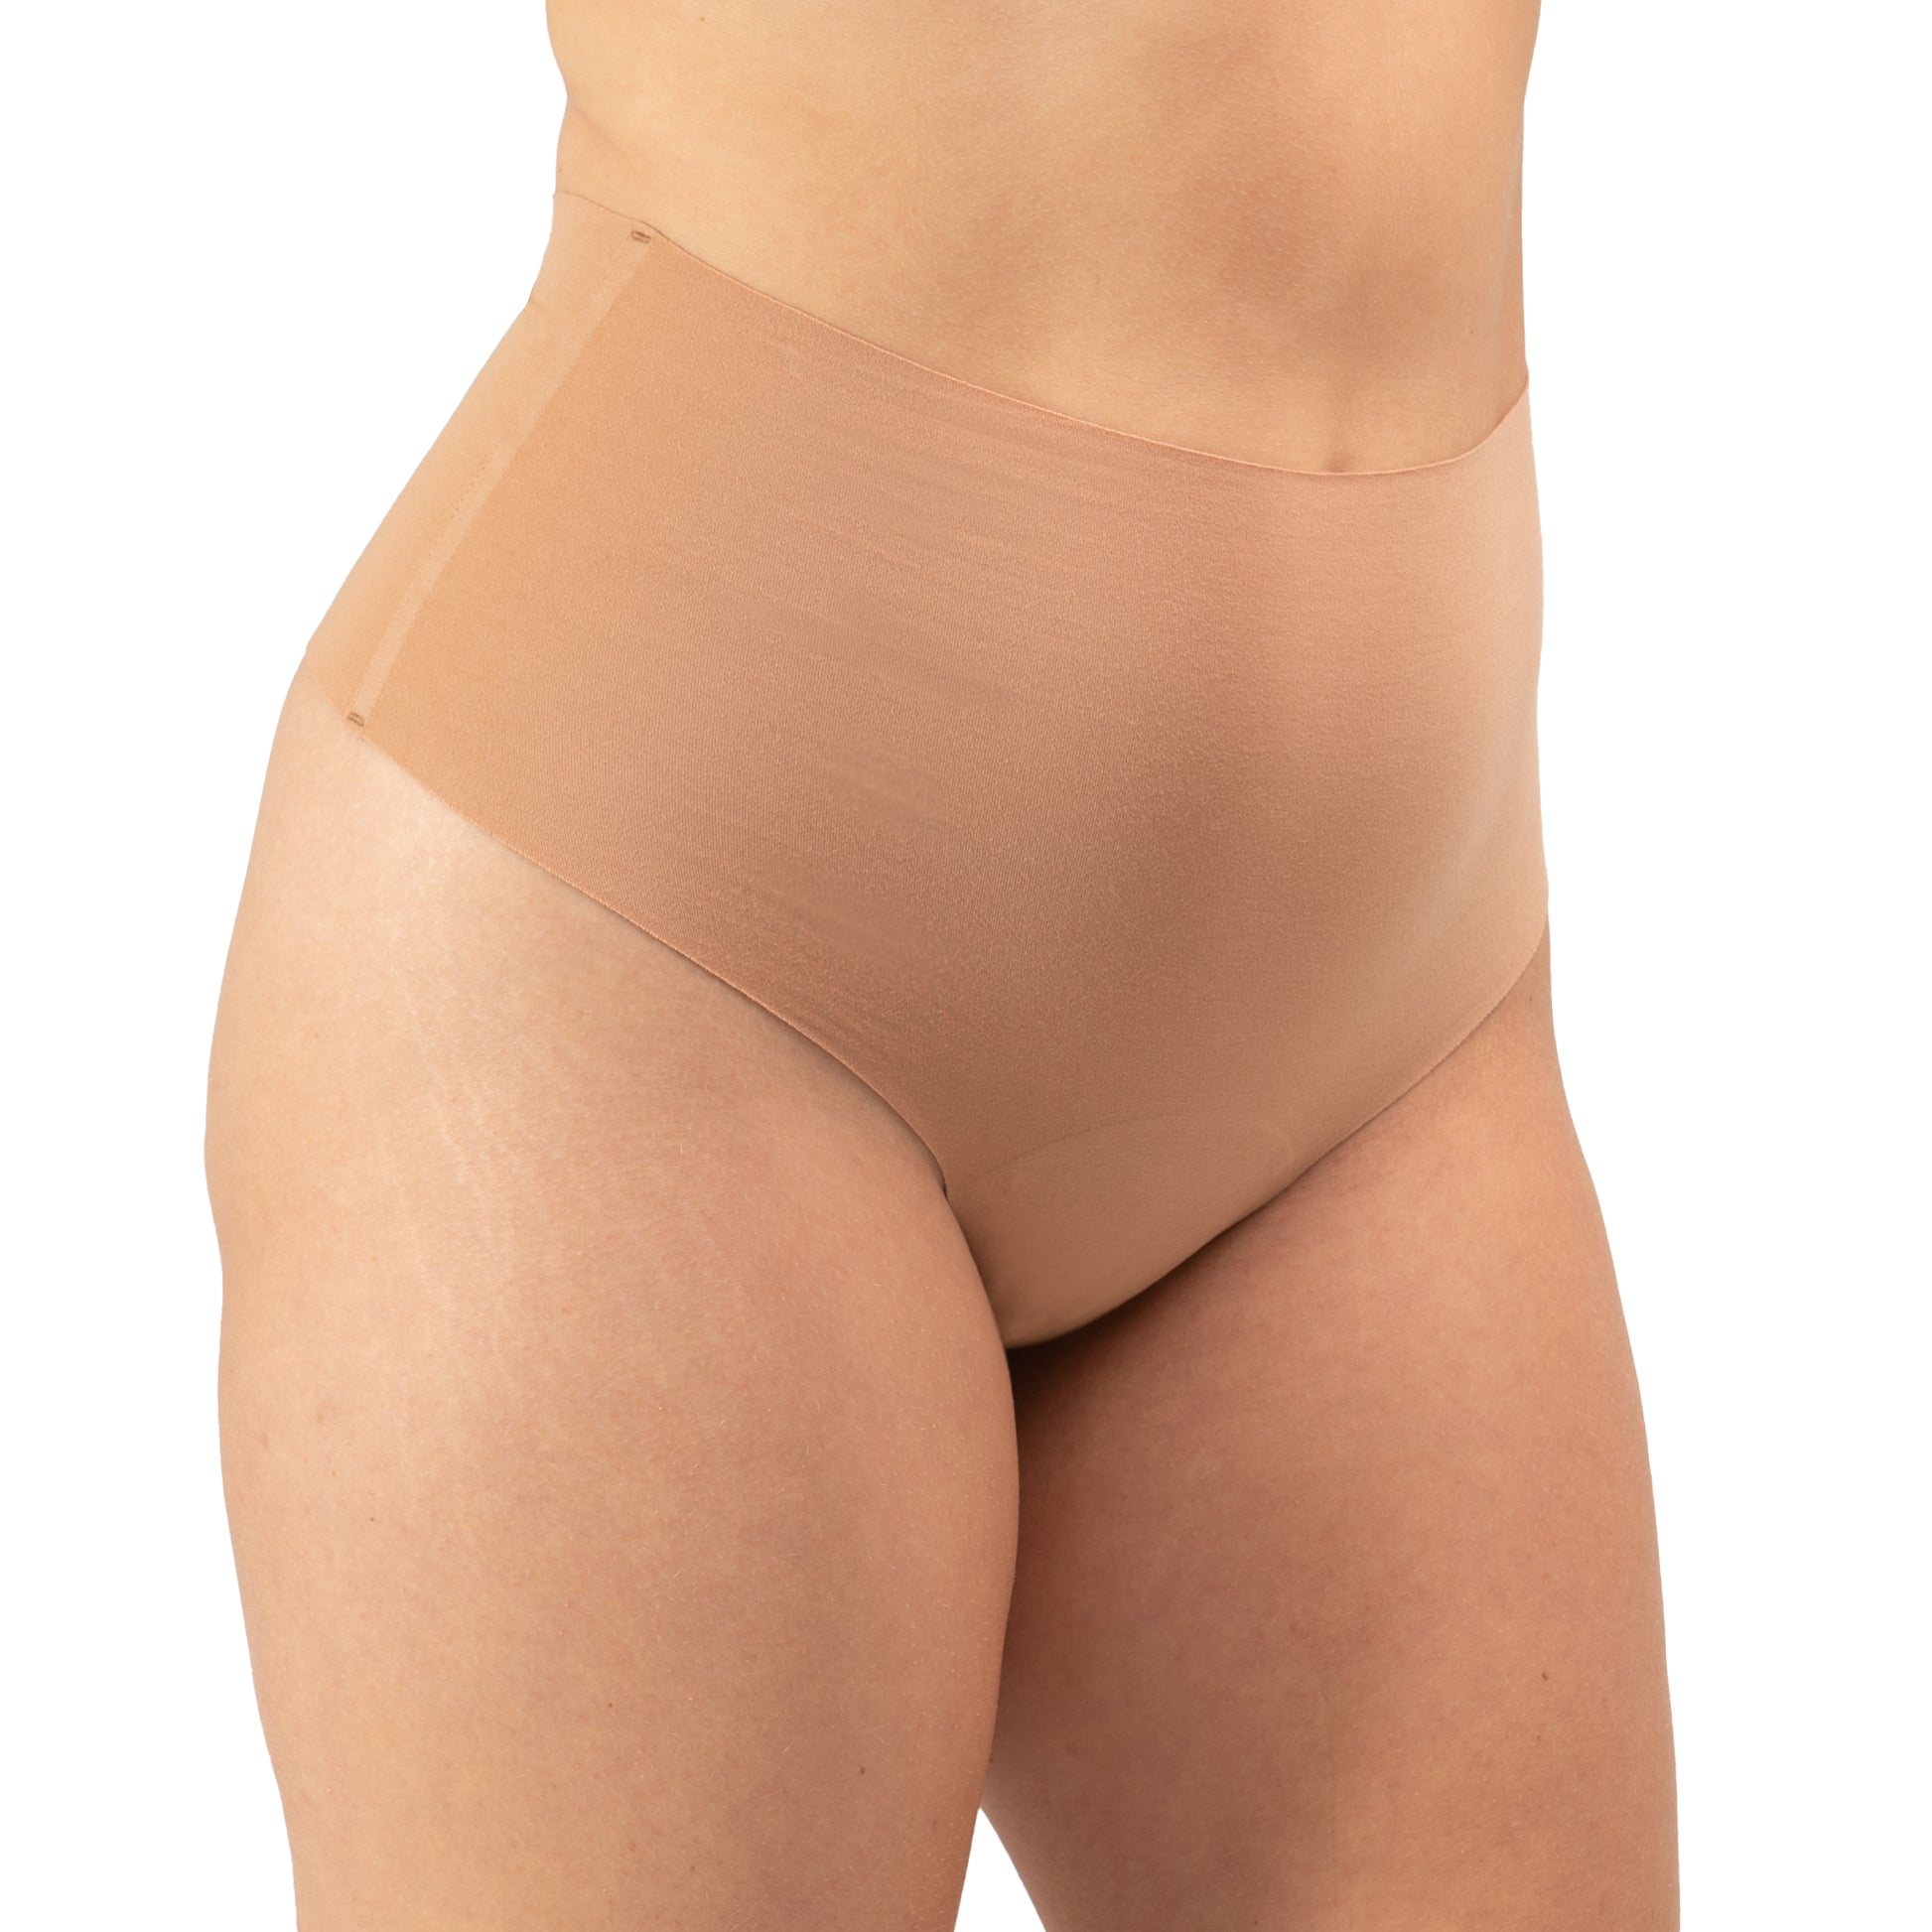 Women's High Waisted Bikini cotton underwear in the color sand - front view